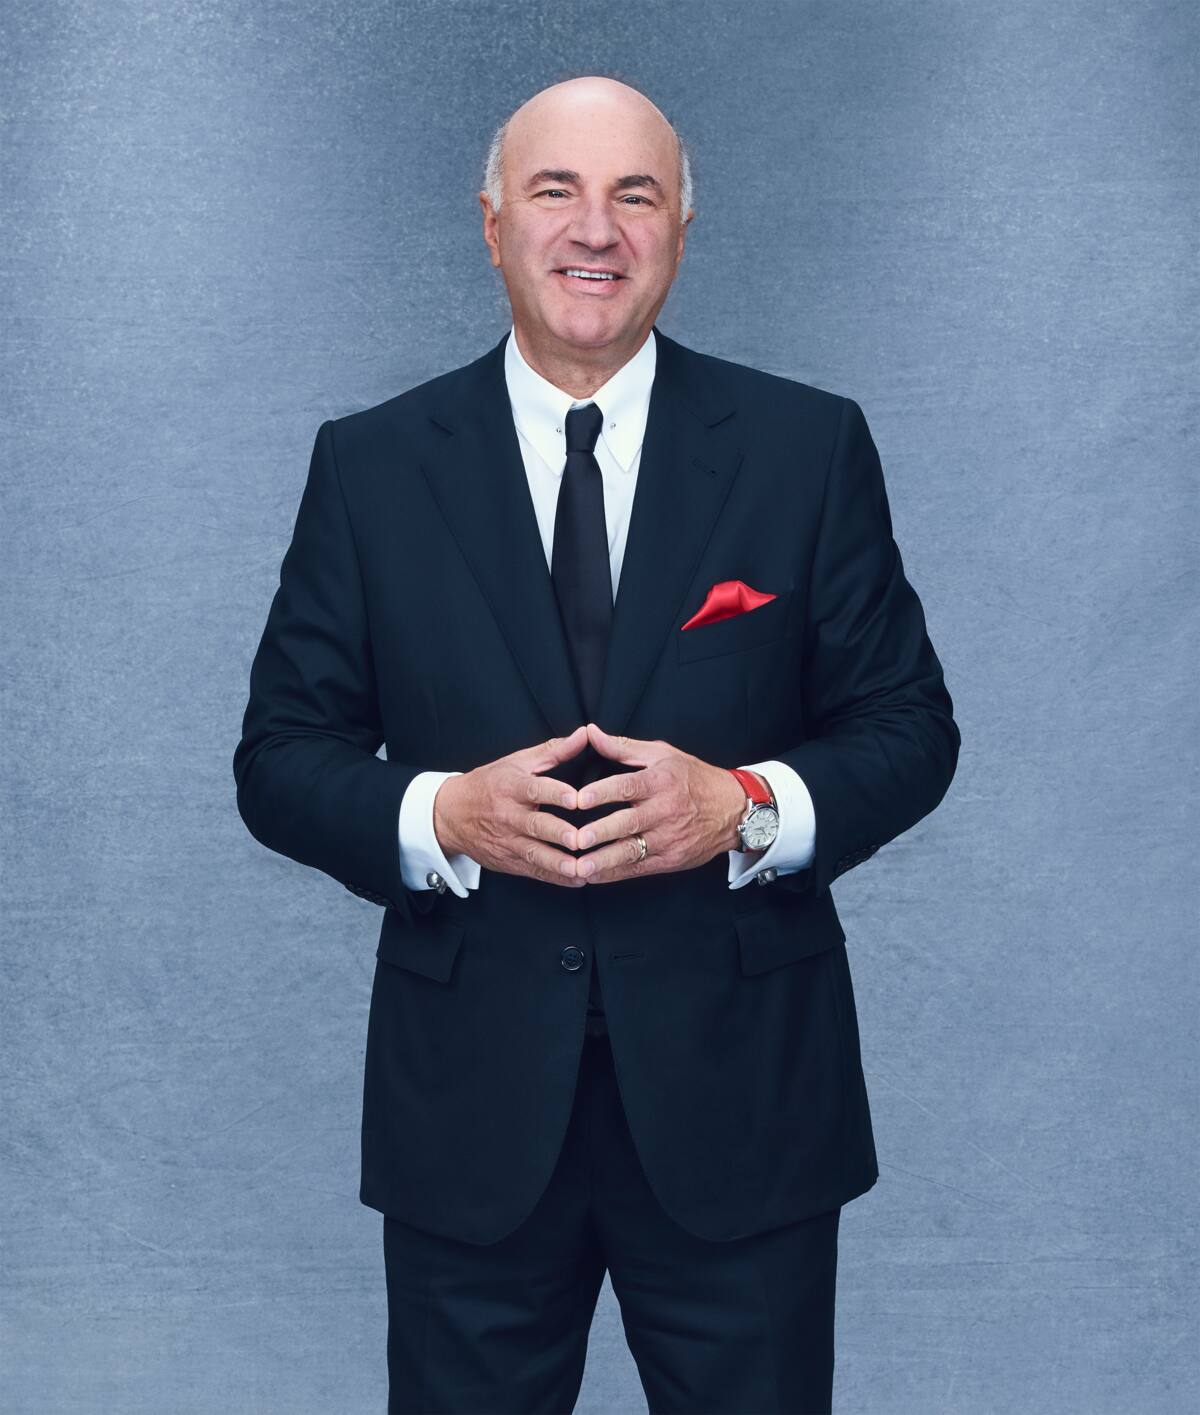 Mr Wonderful's net worth, age, real name, children, wife, businesses, height, profiles